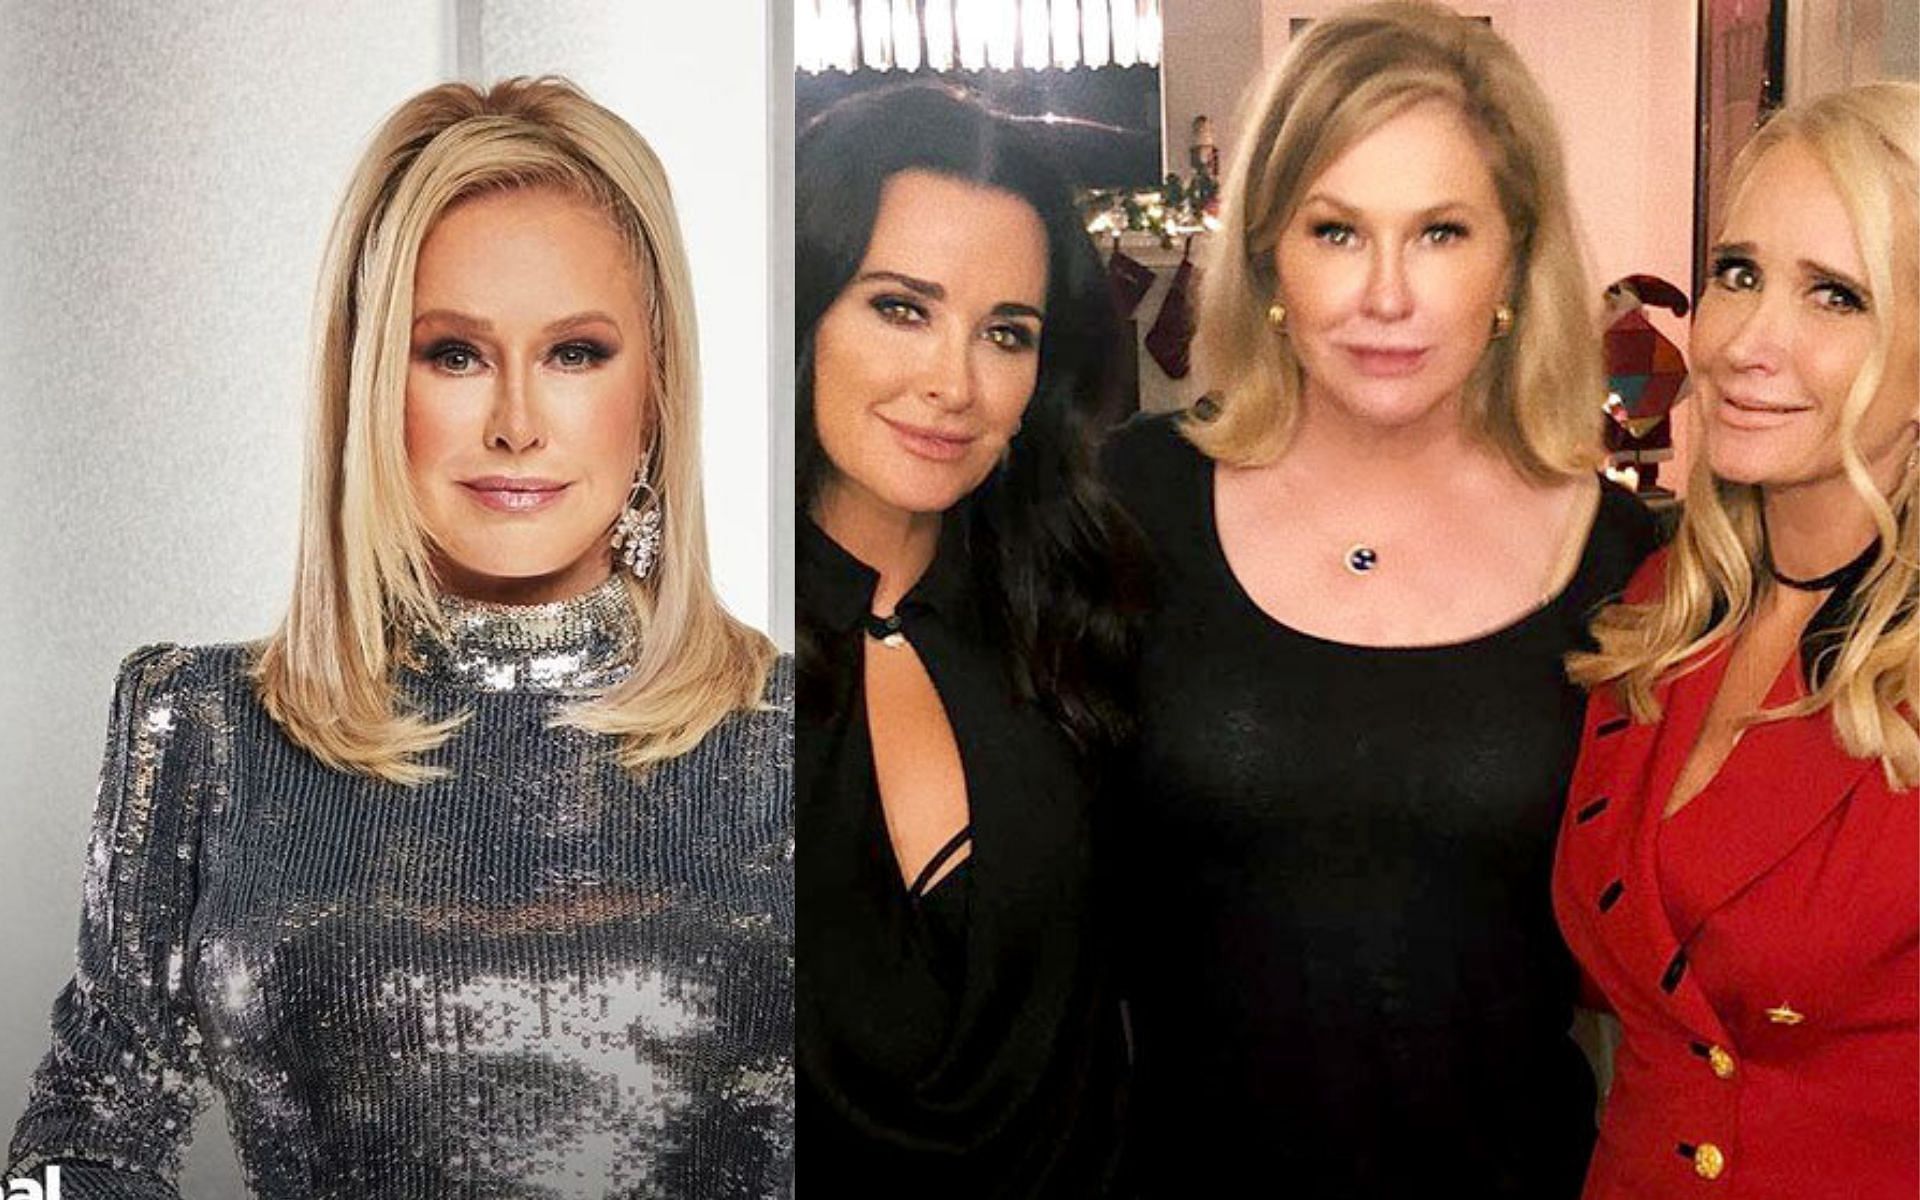 Kathy Hilton's Go-To Holiday Gifts, from DirecTV and Caviar to